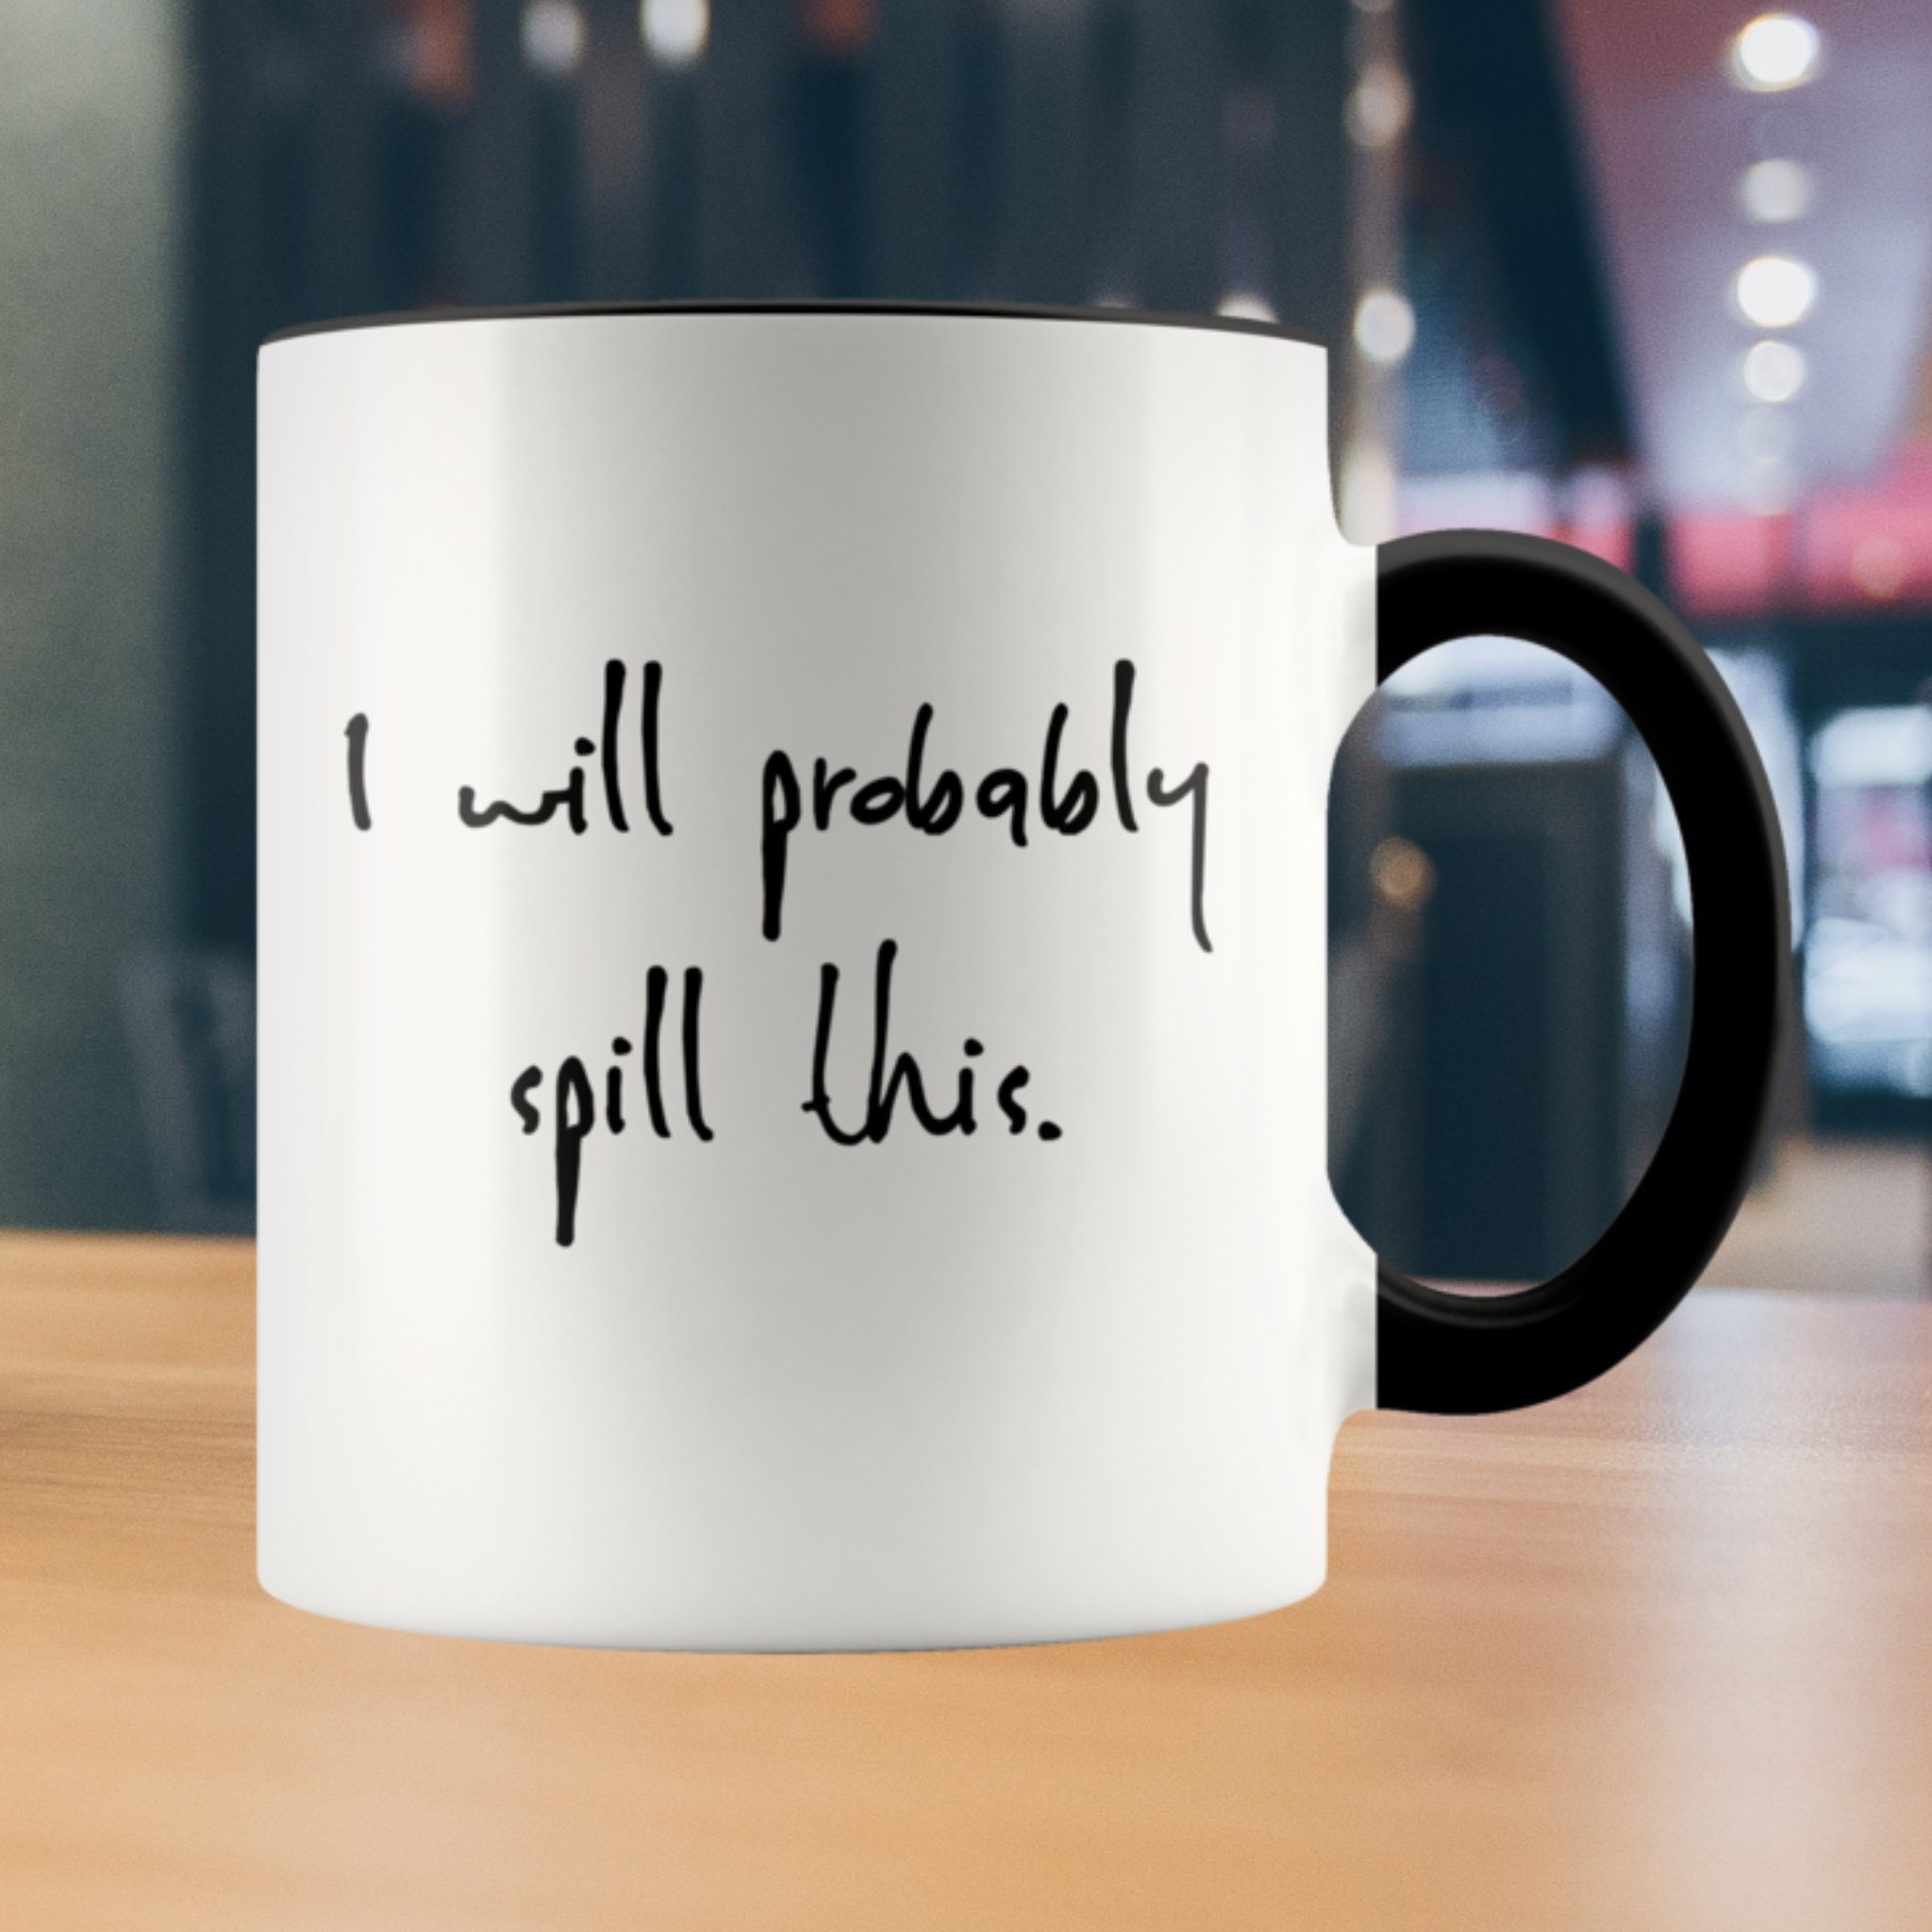 Clumsy Gifts for Clumsy People-Gag Gift for Clumsy People/Clumsy Person-Last Minute Birthday Gifts-Sarcastic Coffee Mugs-I Will Probably Spill This Mug Ceramic Coffee Cup Gift for Boss 